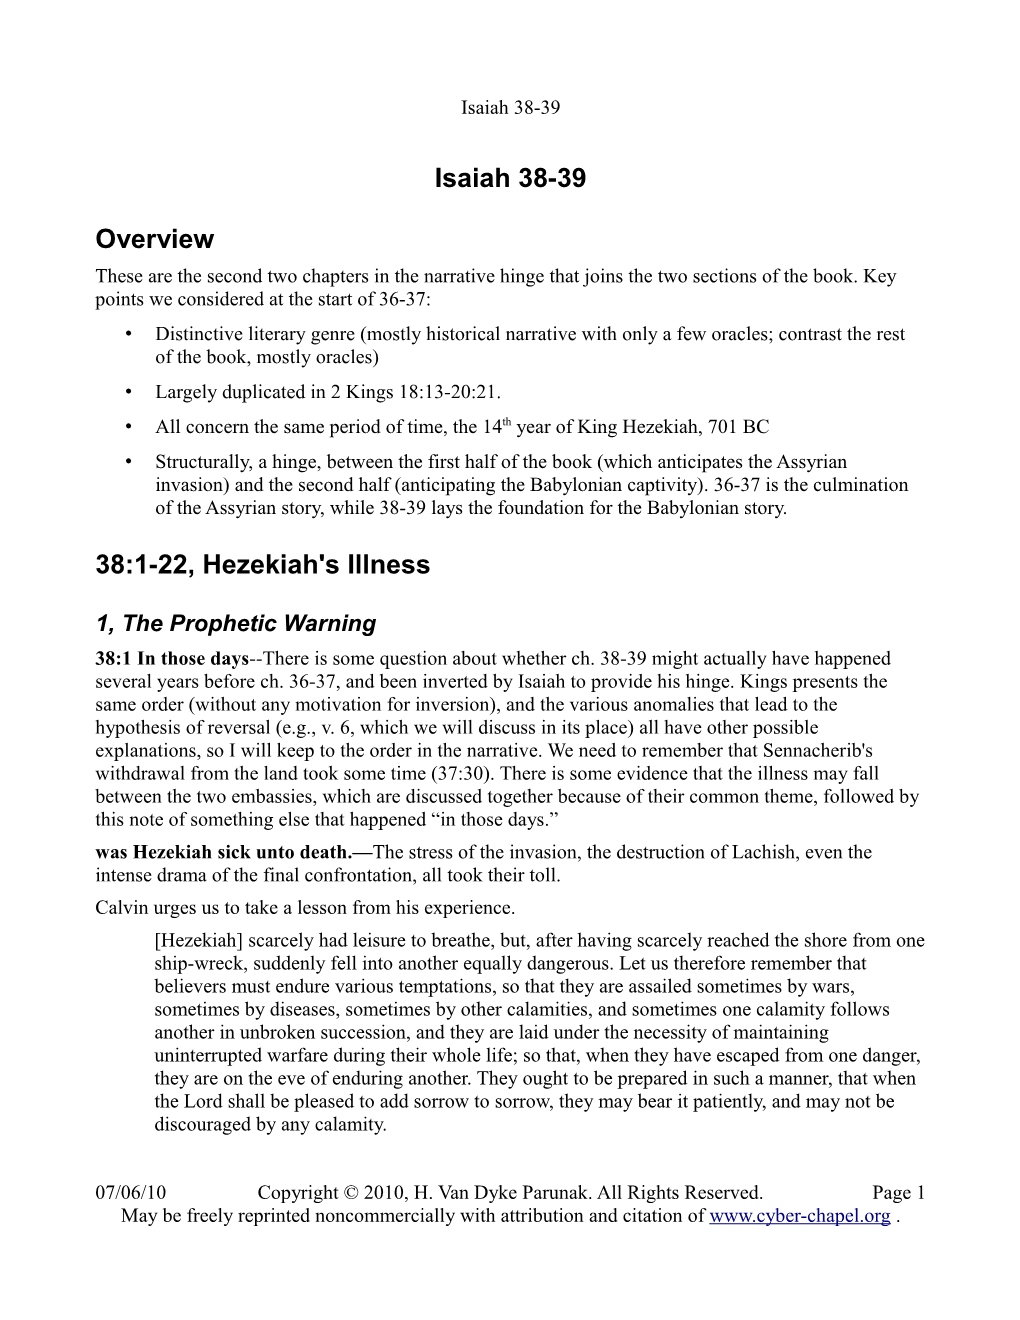 Notes on Isaiah 38-39